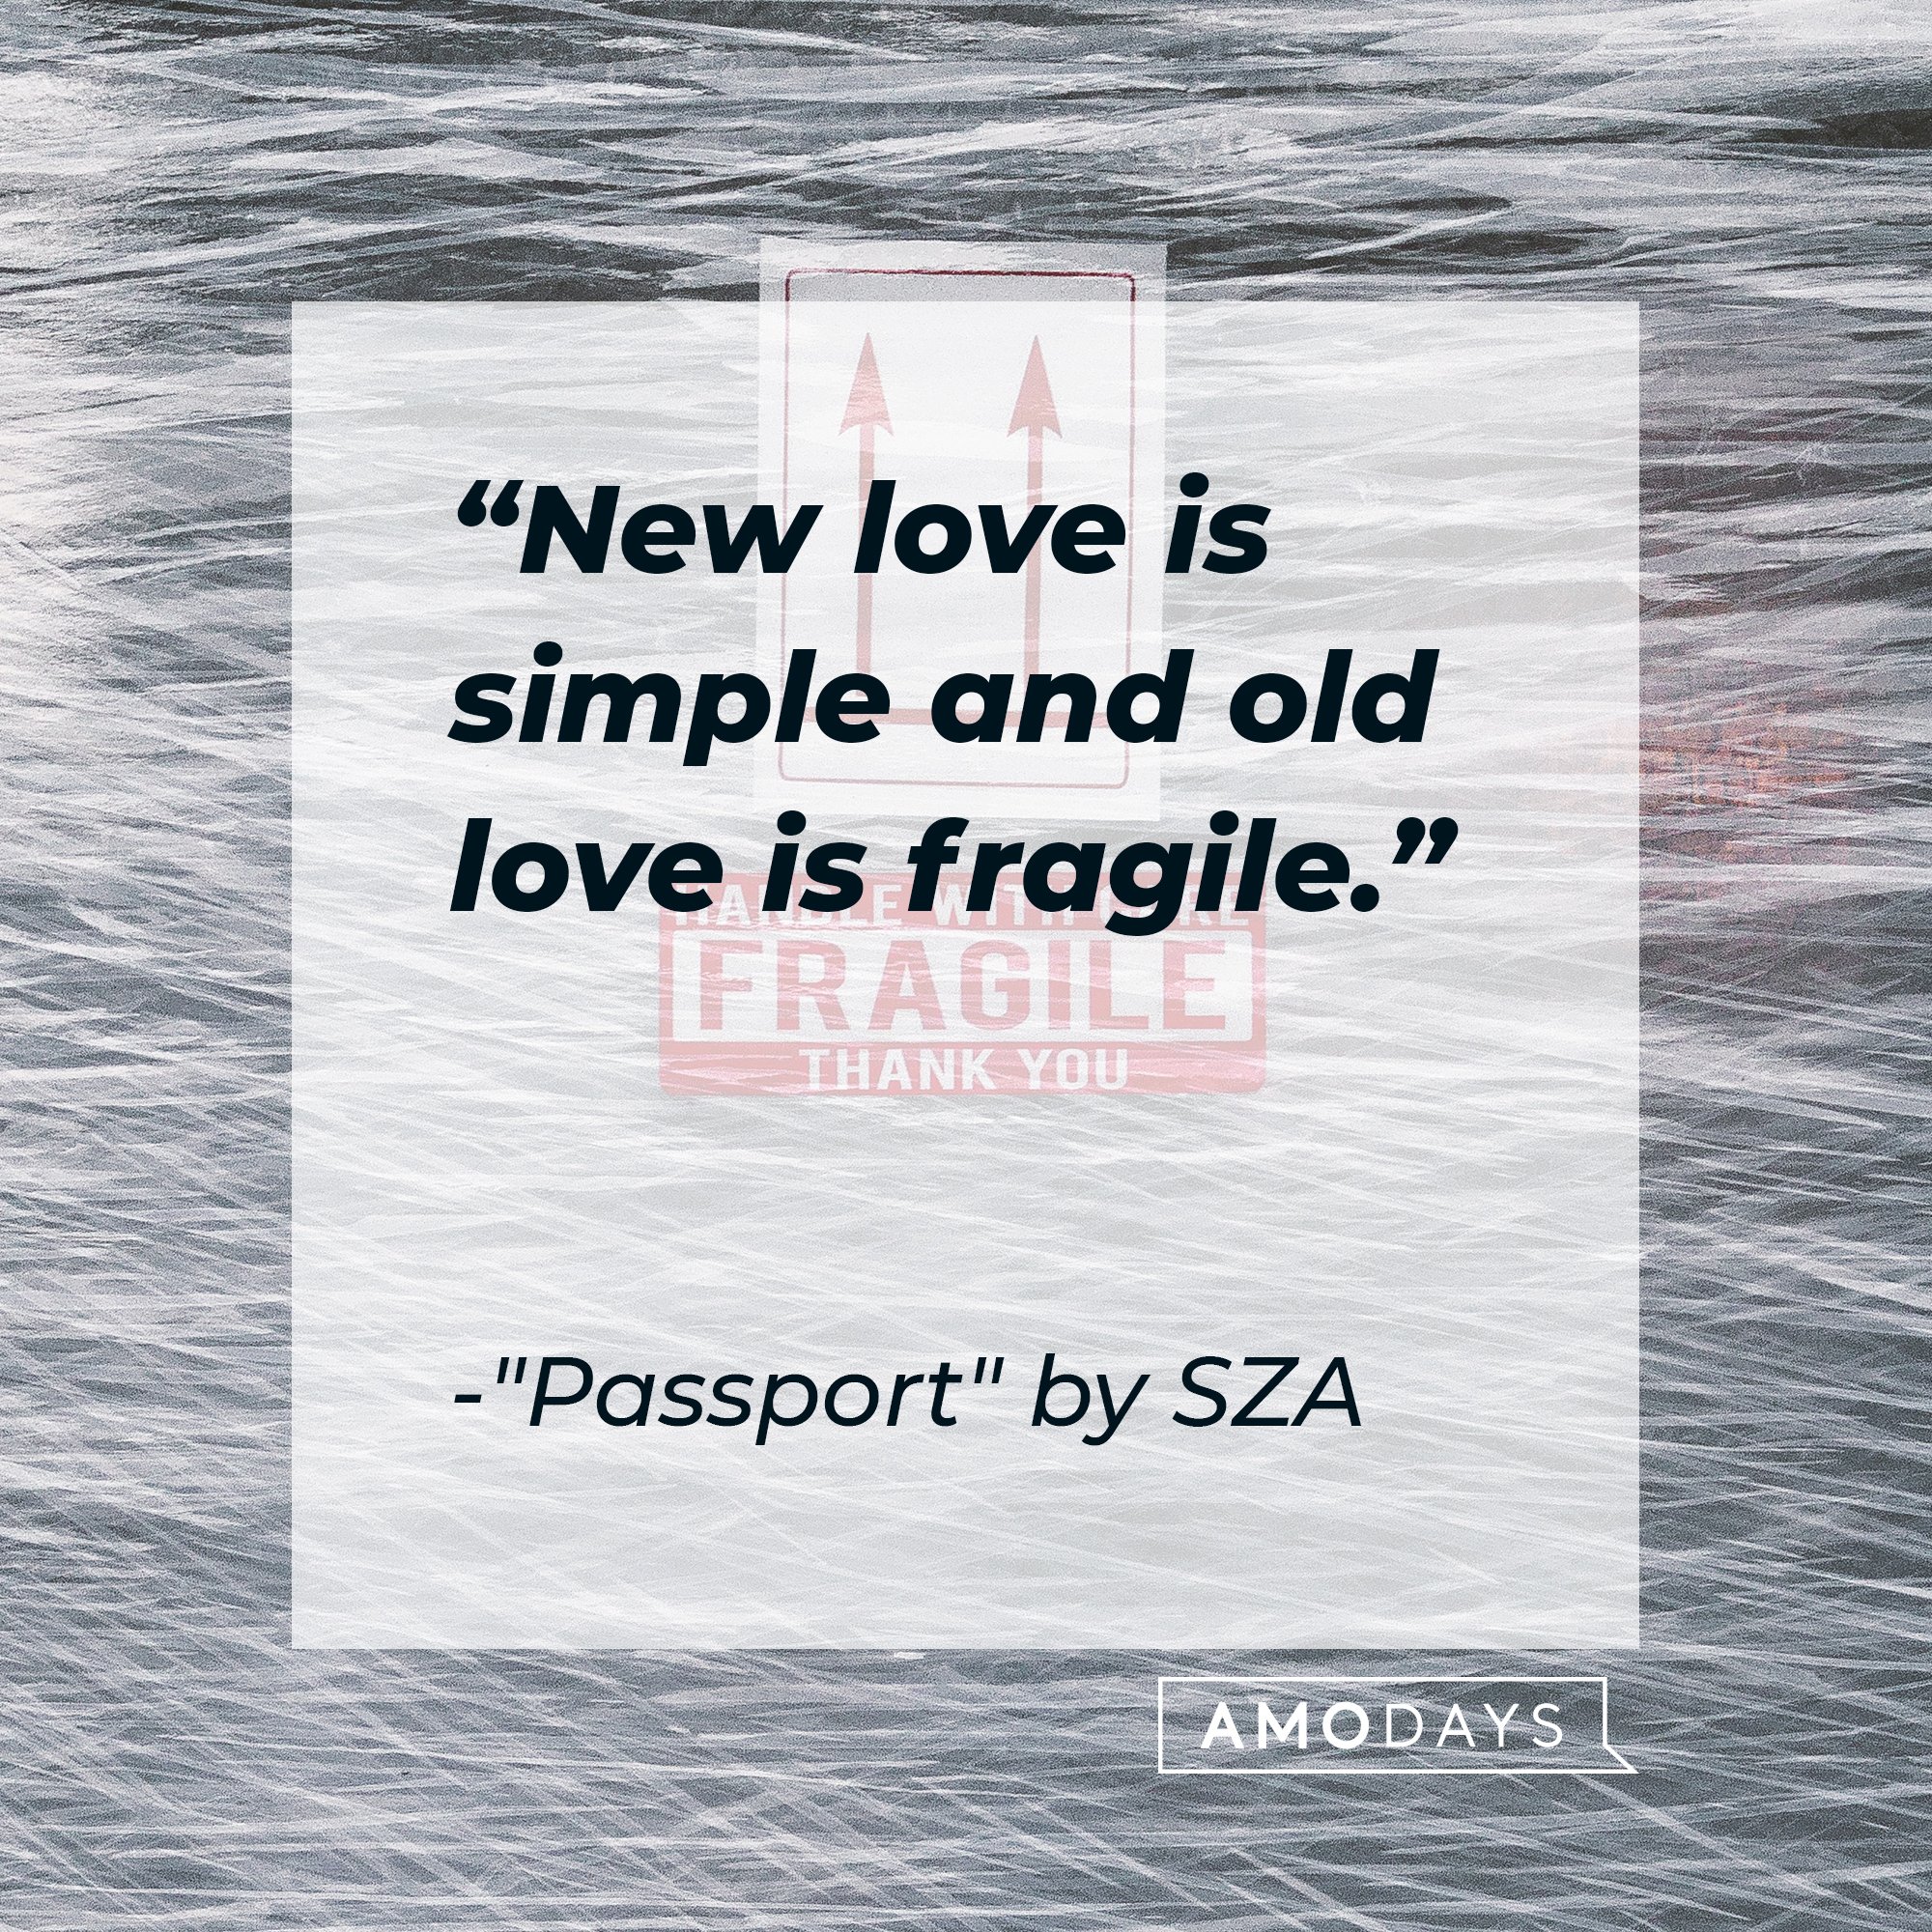 SZA’s quote from "Passport" : "New love is simple and old love is fragile." | Image: AmoDays